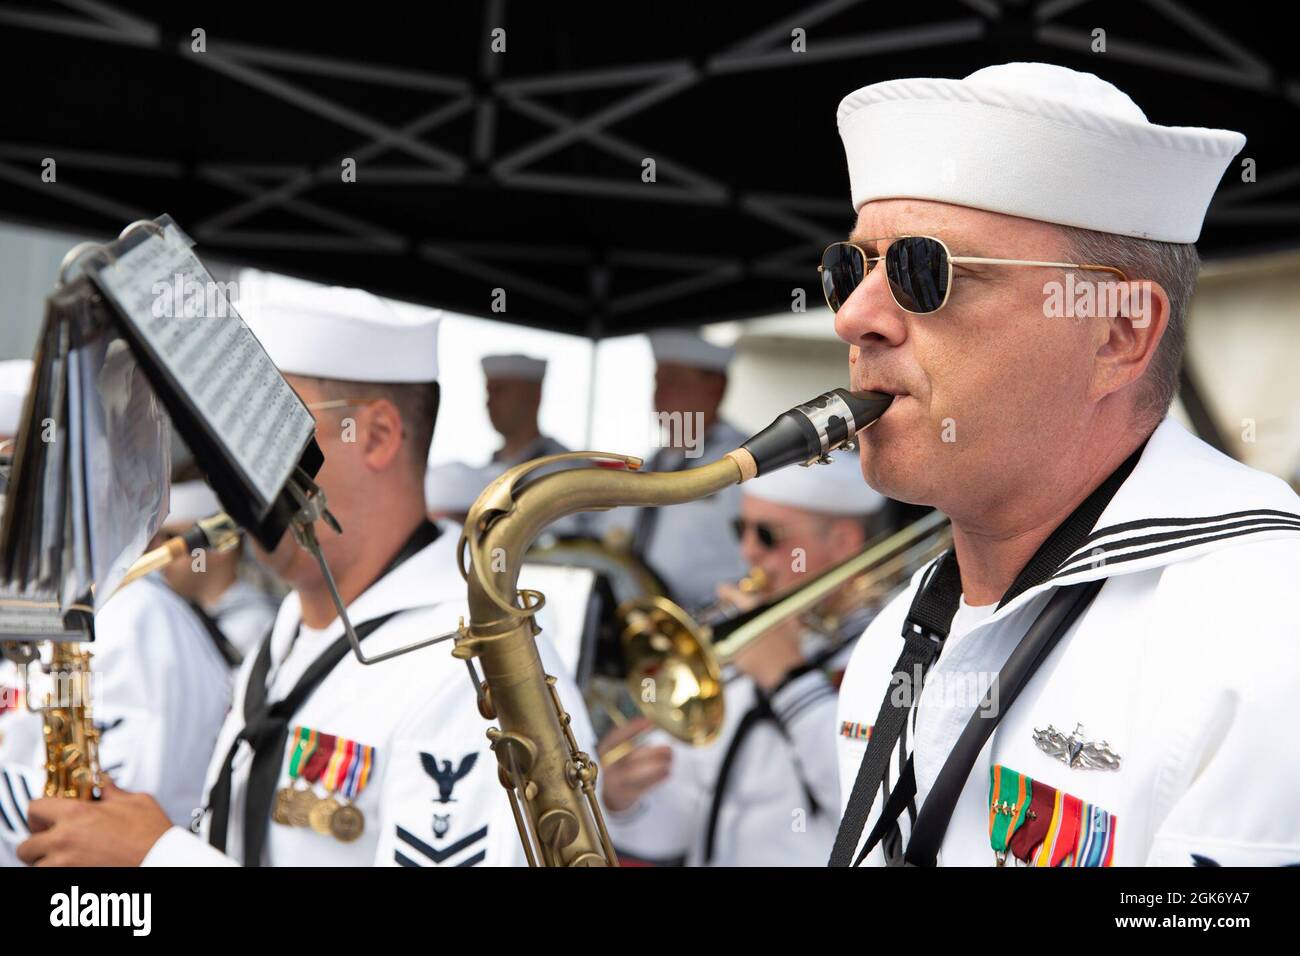 SAN DIEGO (Aug. 19, 2021) Sailors assigned to the Navy Band Commander, Navy Region Southwest, play music during a change of command ceremony aboard the aircraft carrier USS Abraham Lincoln (CVN 72). Capt. Walt “Sarge” Slaughter successfully completed his 26 month tour as commanding officer during which Abraham Lincoln completed a 10-month combat deployment, the largest carrier work package ever completed in San Diego, and returned to sea in preparation for an upcoming deployment amidst the COVID-19 pandemic. Slaughter was relieved by Capt. Amy Bauernschmidt. Stock Photo